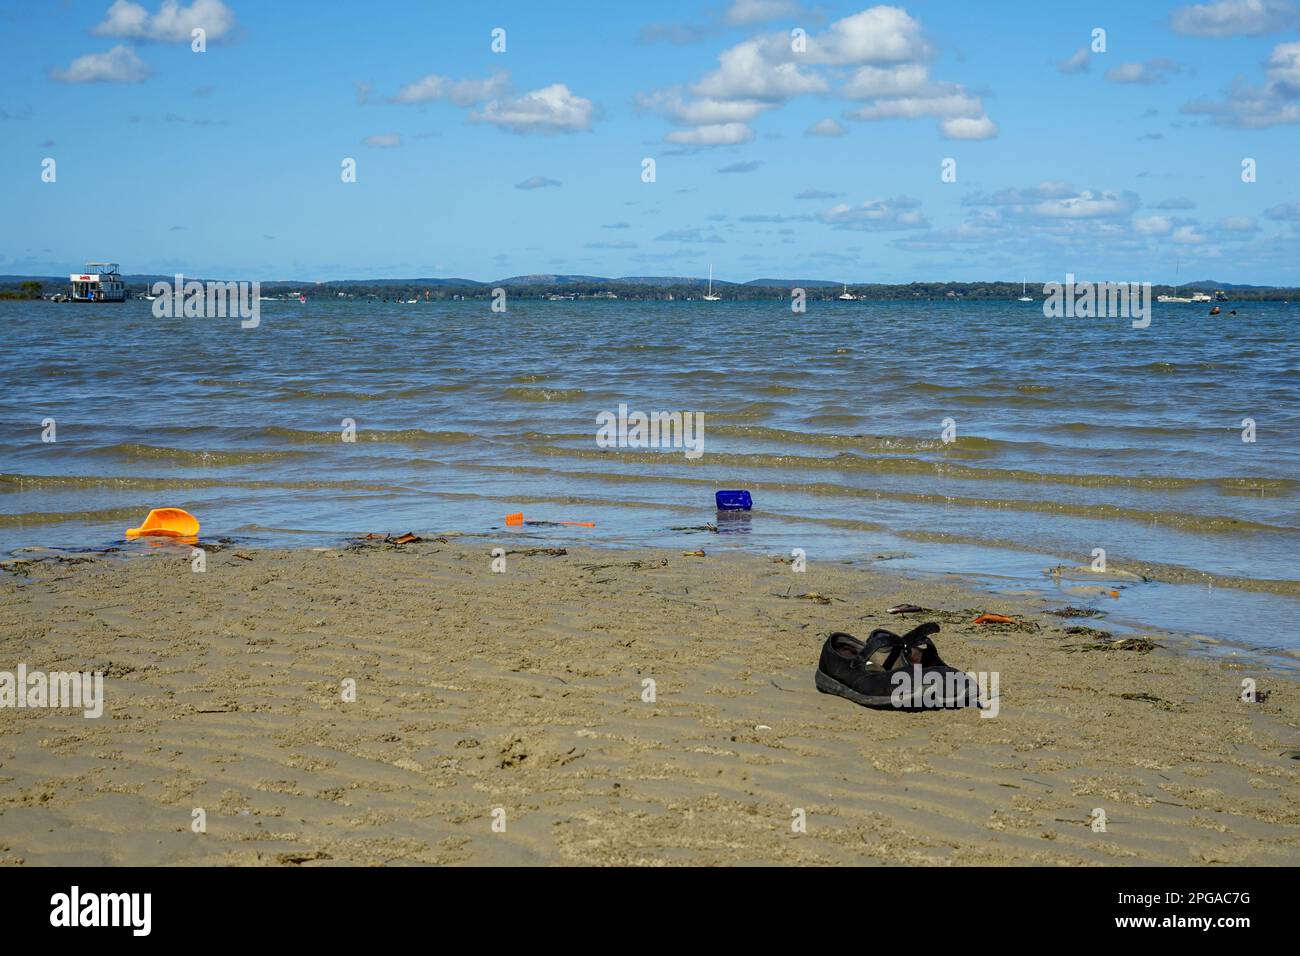 Black shoes, and colourful plastic Beach toys by the waters edge at Thompsons Beach, Victoria Point Queensland. Macleay Island in the distance. Stock Photo